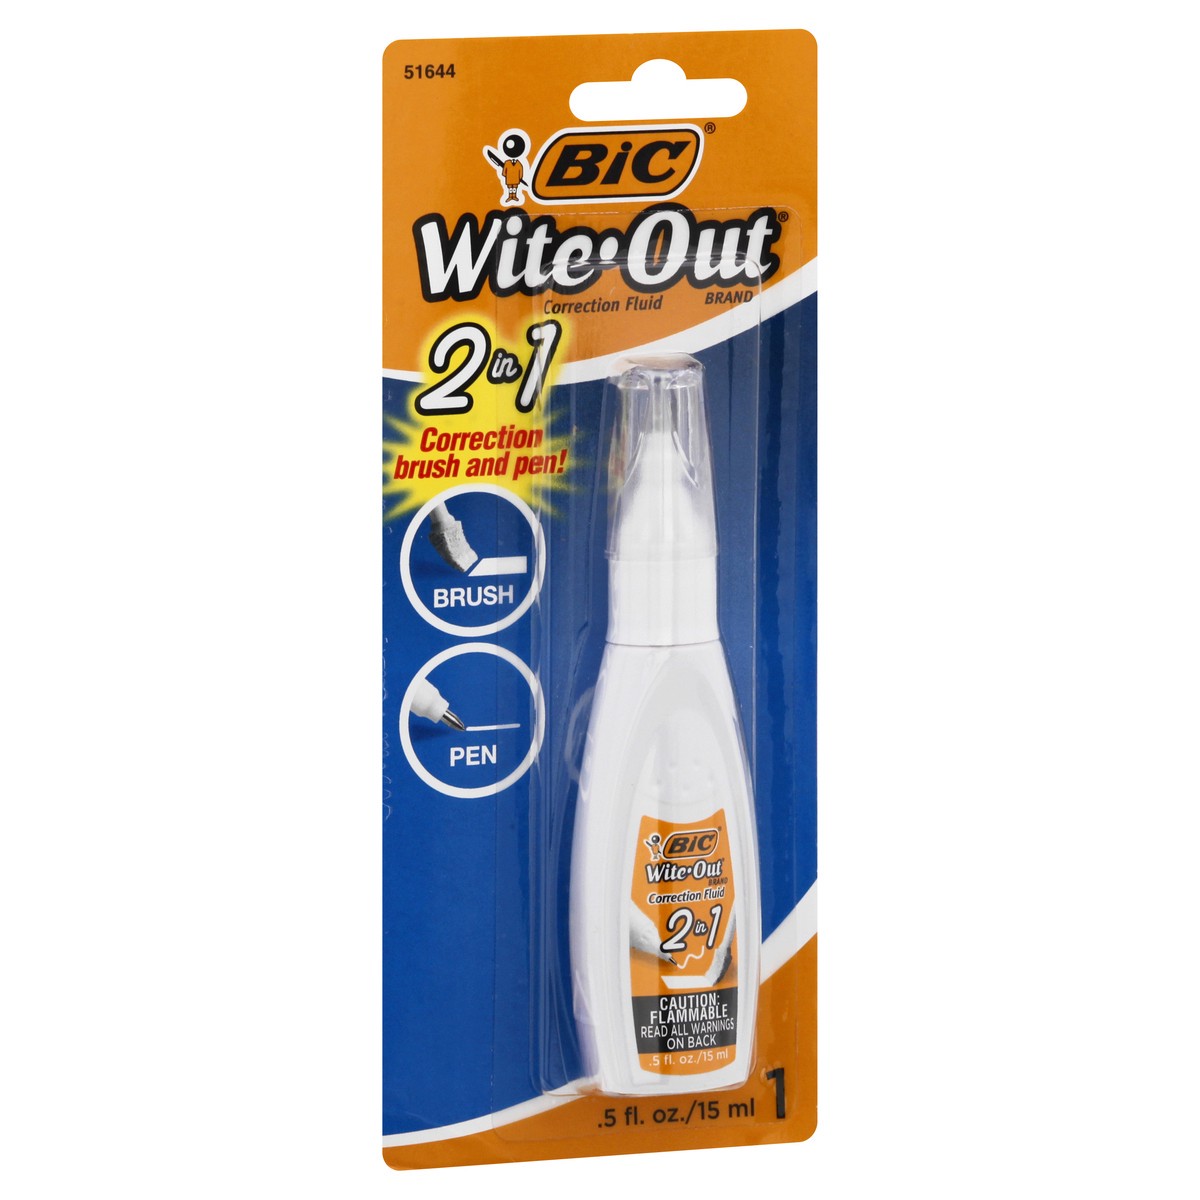 slide 2 of 9, BIC Wite-Out 2-in-1 Correction Fluid, 1 ct